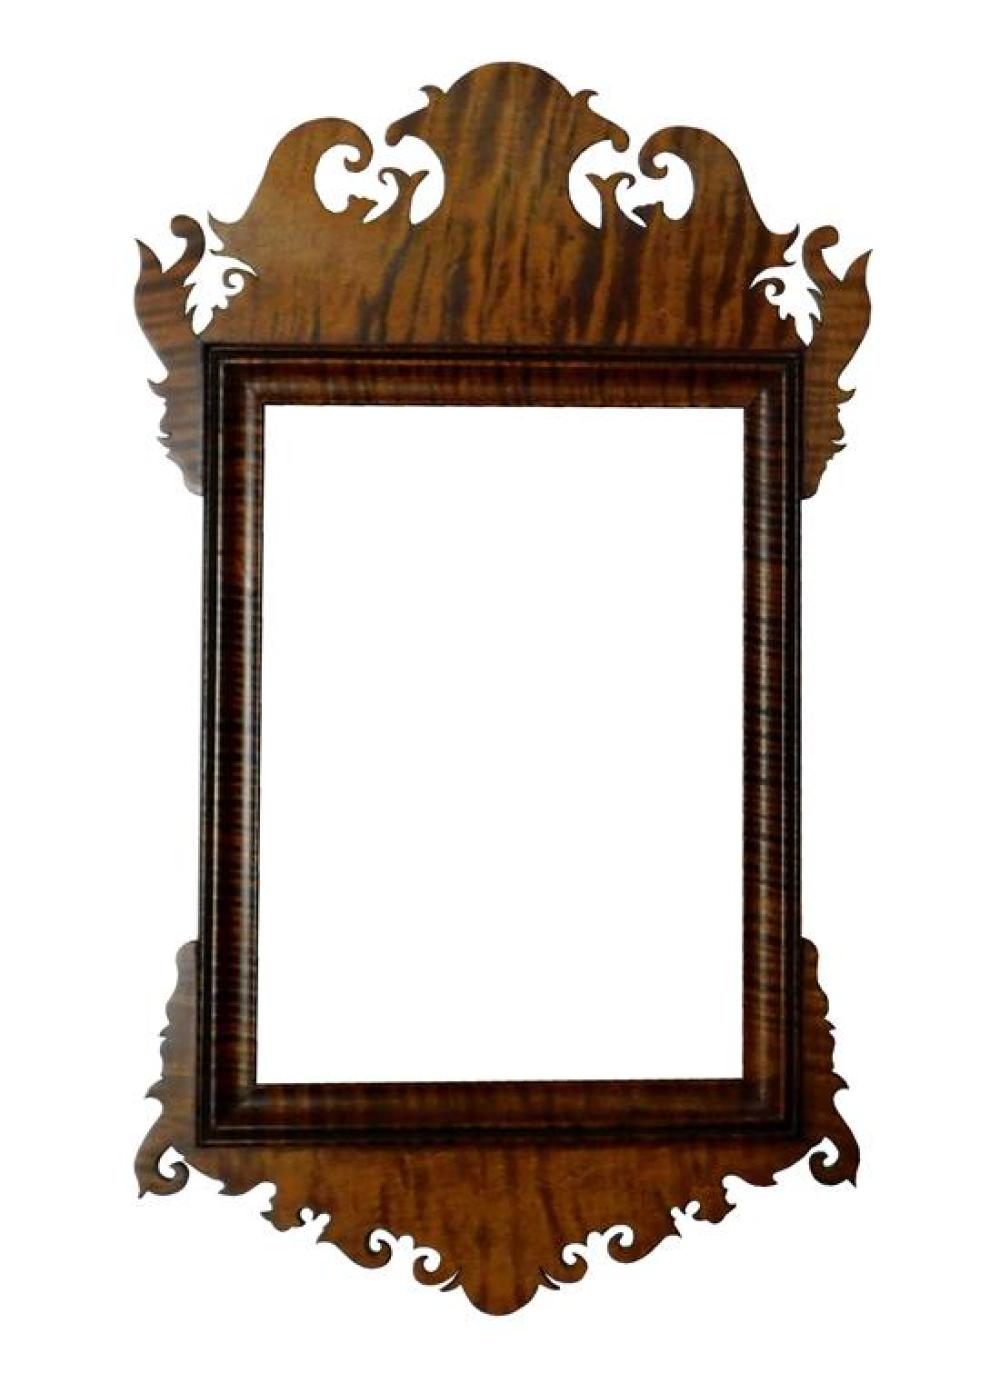 SMALL CHIPPENDALE STYLE WALL MIRROR,